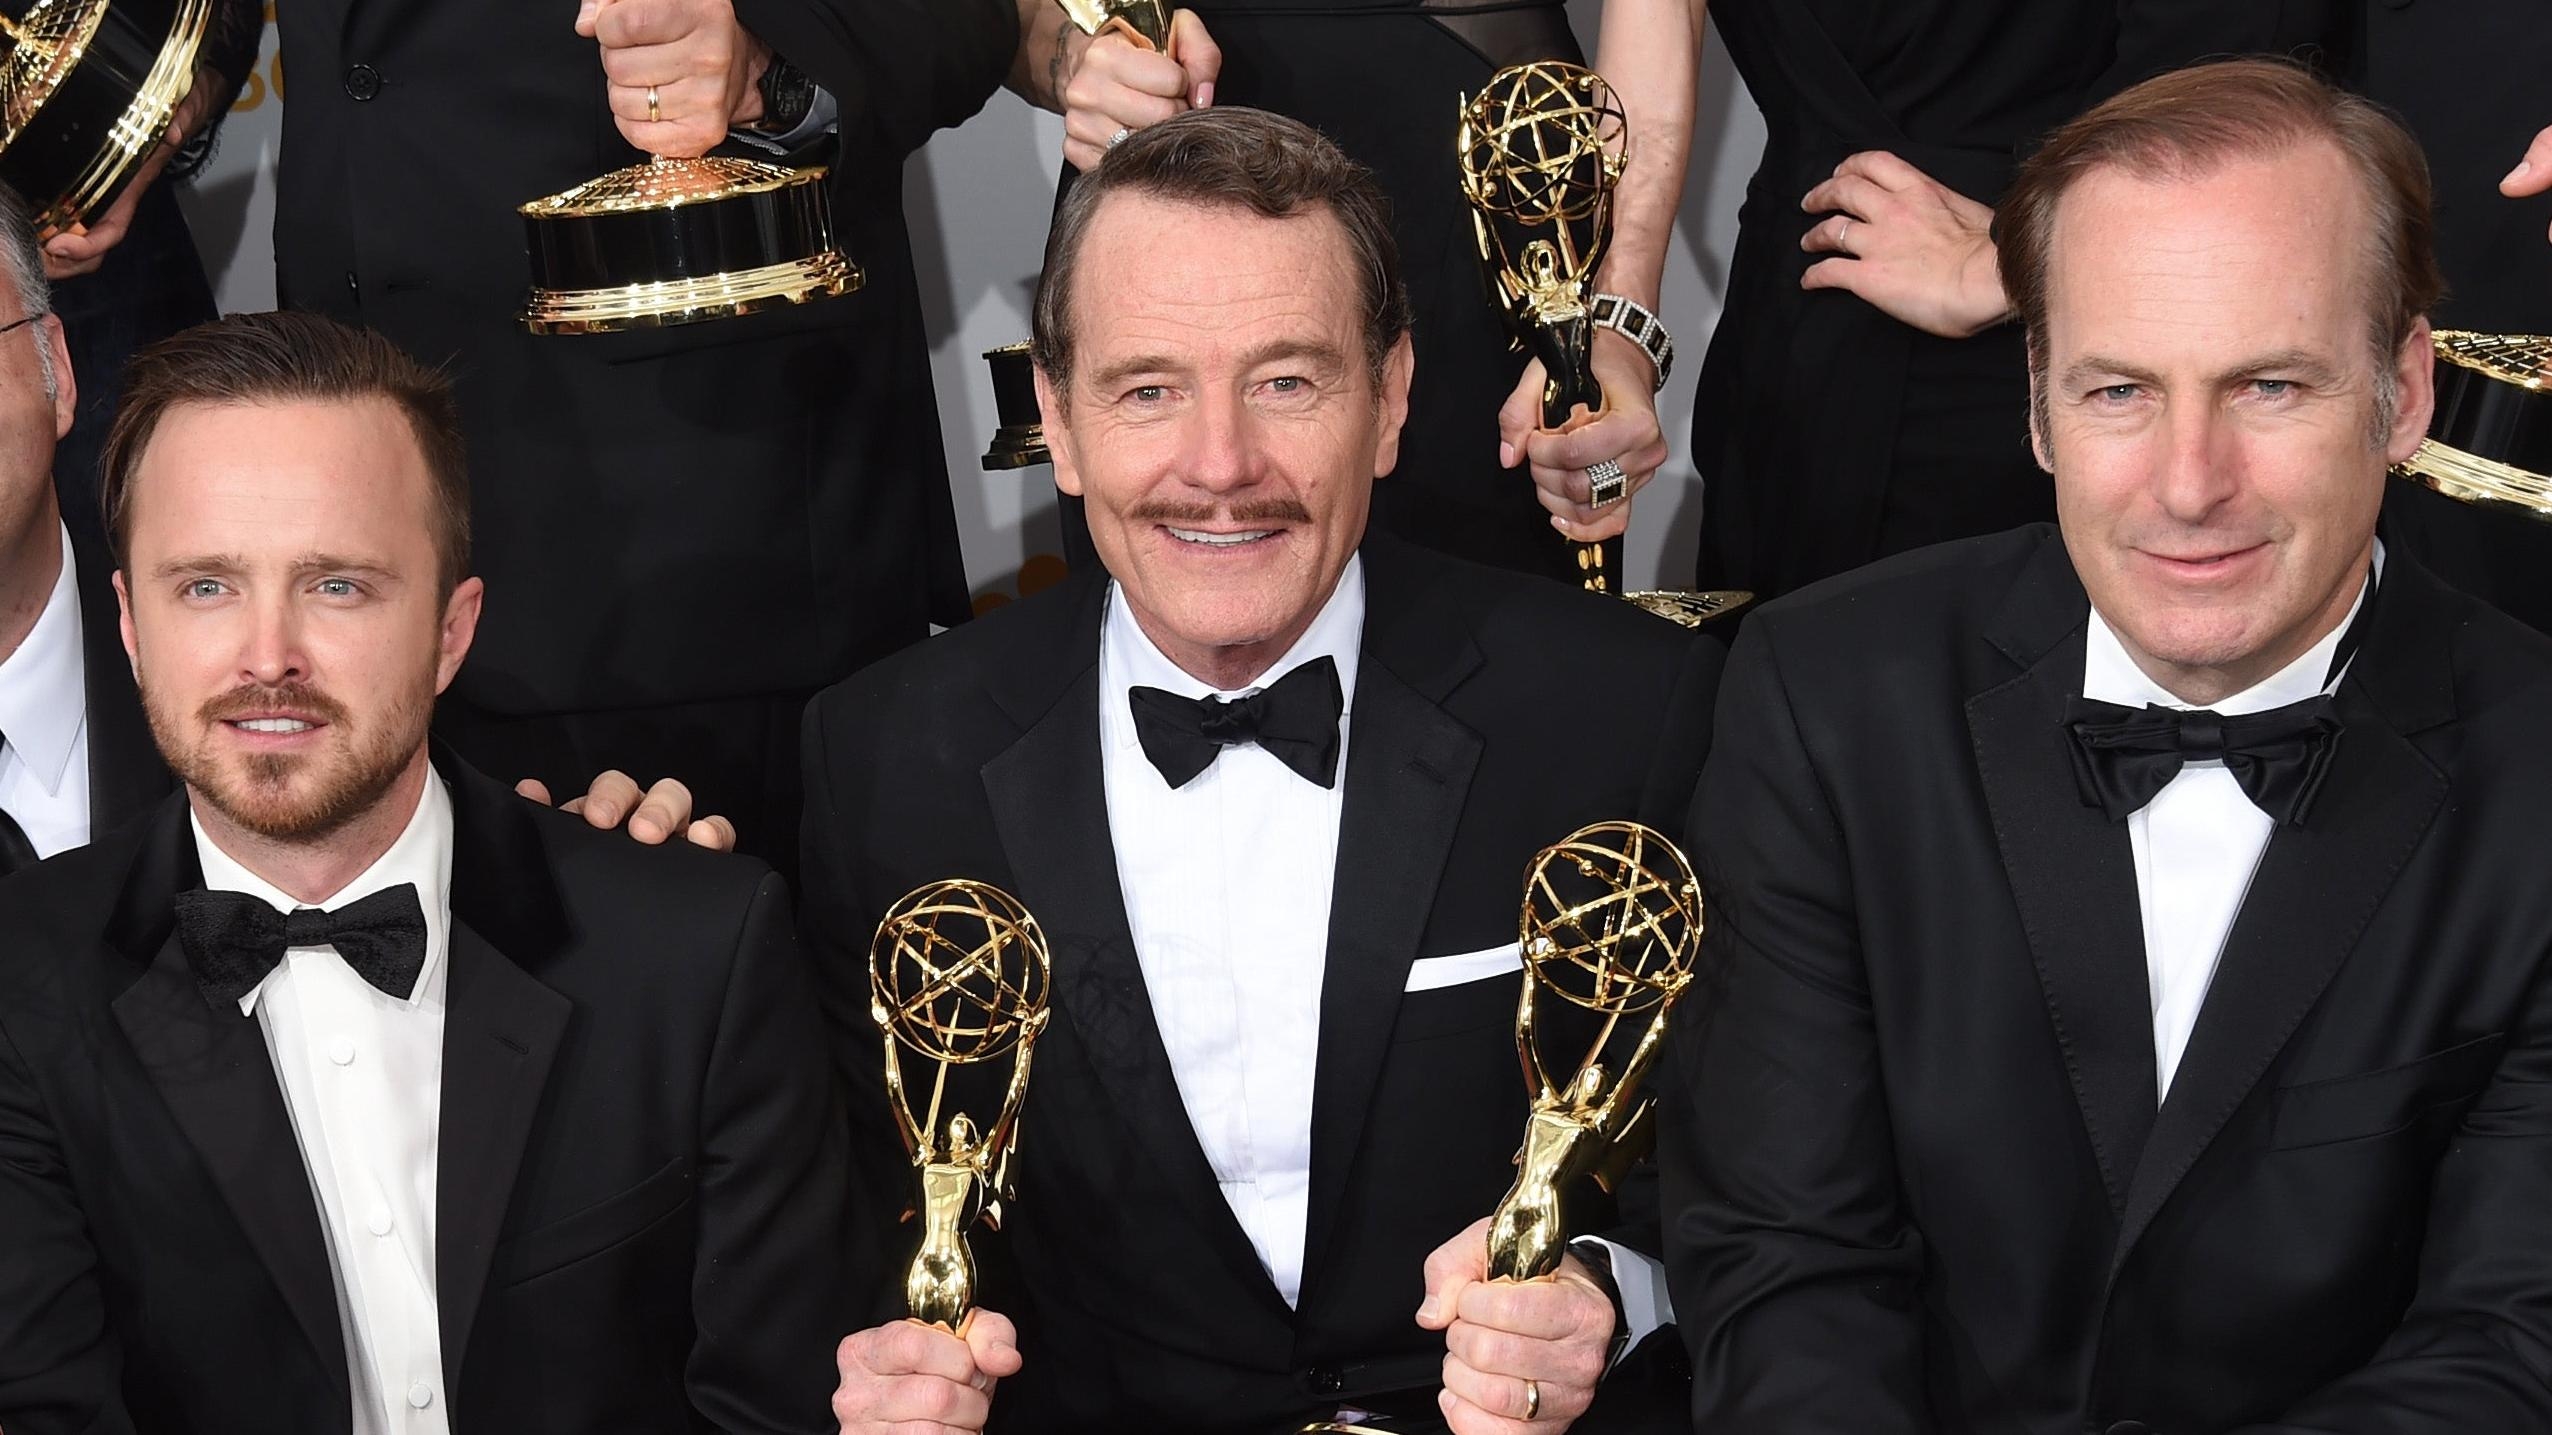 Producers confirm: Bryan Cranston and Aaron Paul will appear in final season of Better Call Saul